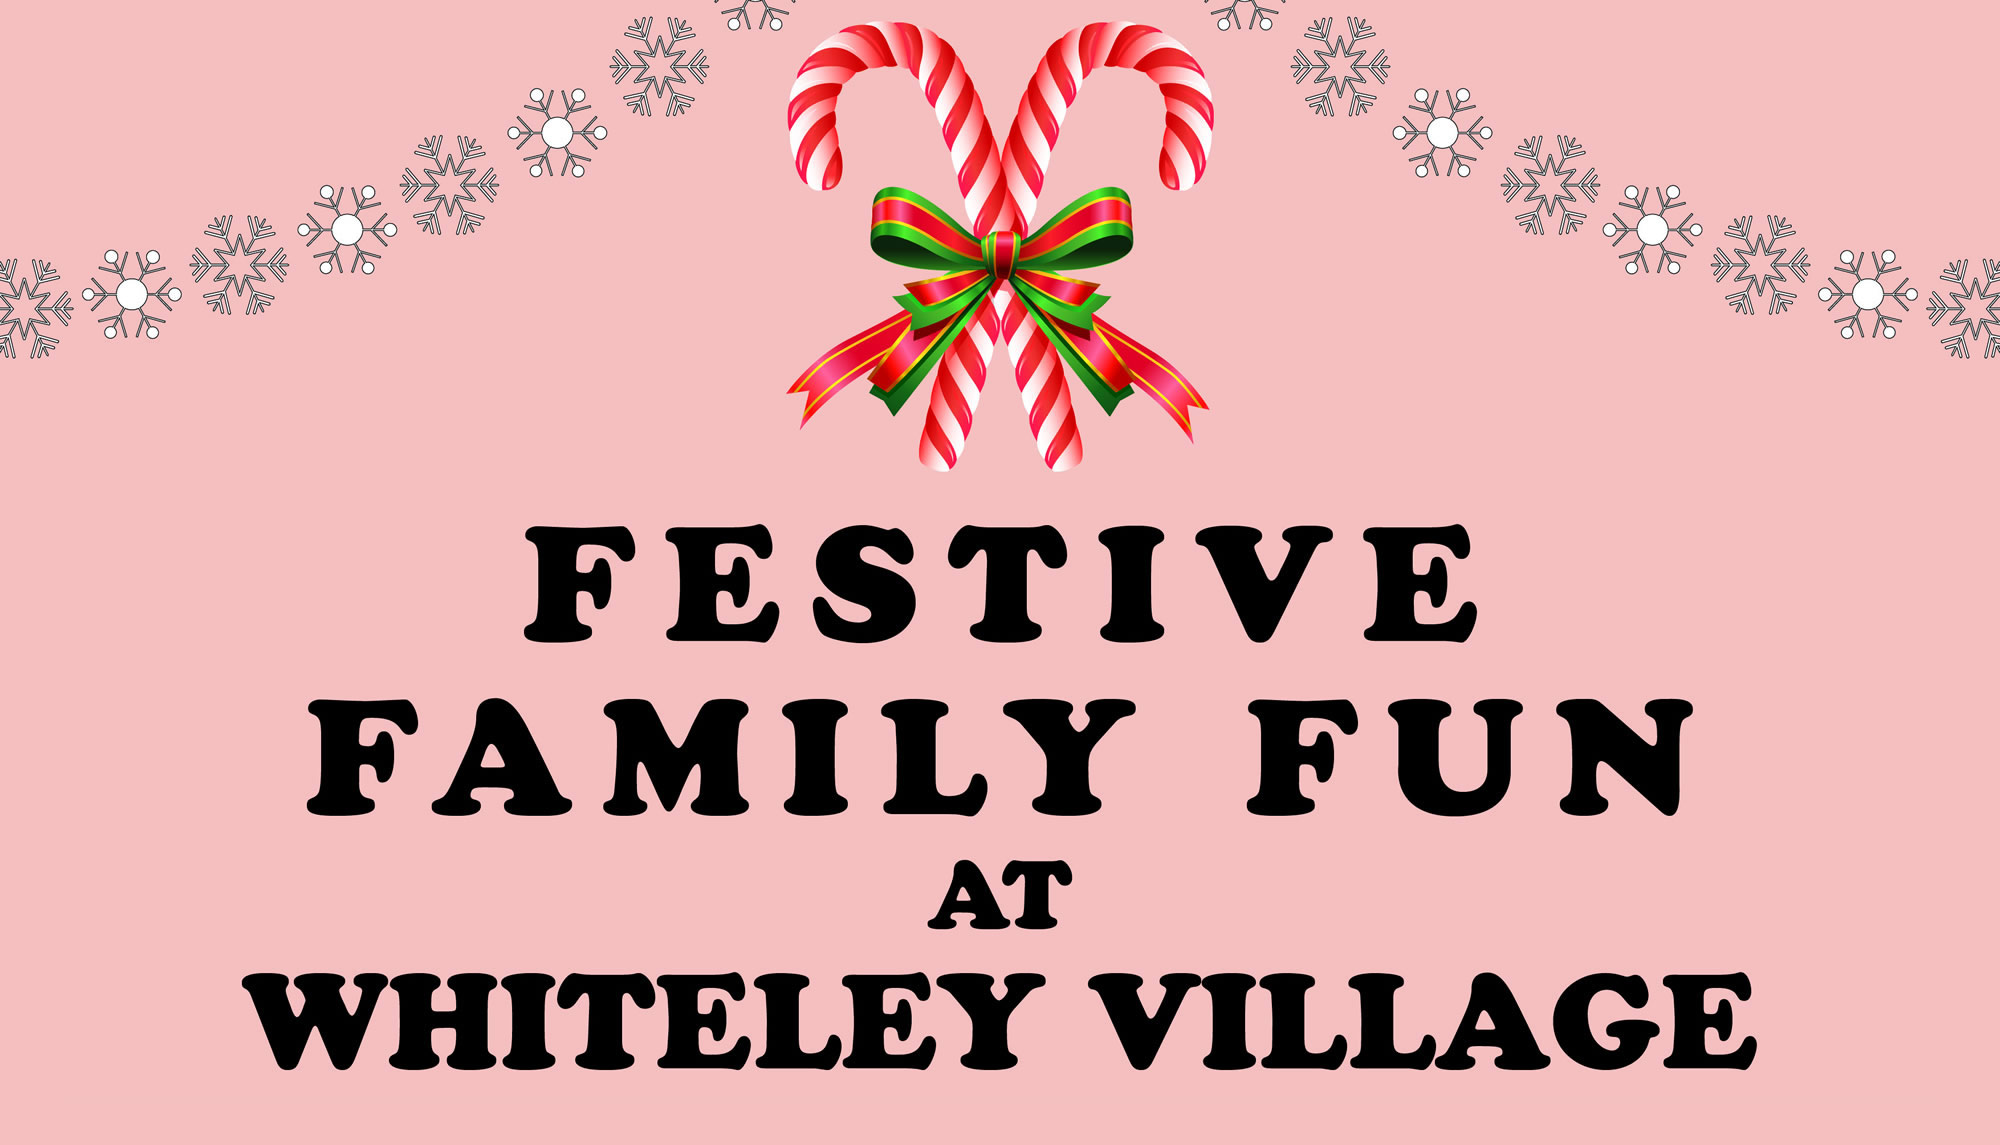 Festive Family Fun Event at Whiteley Village – Sunday 9th December 2018